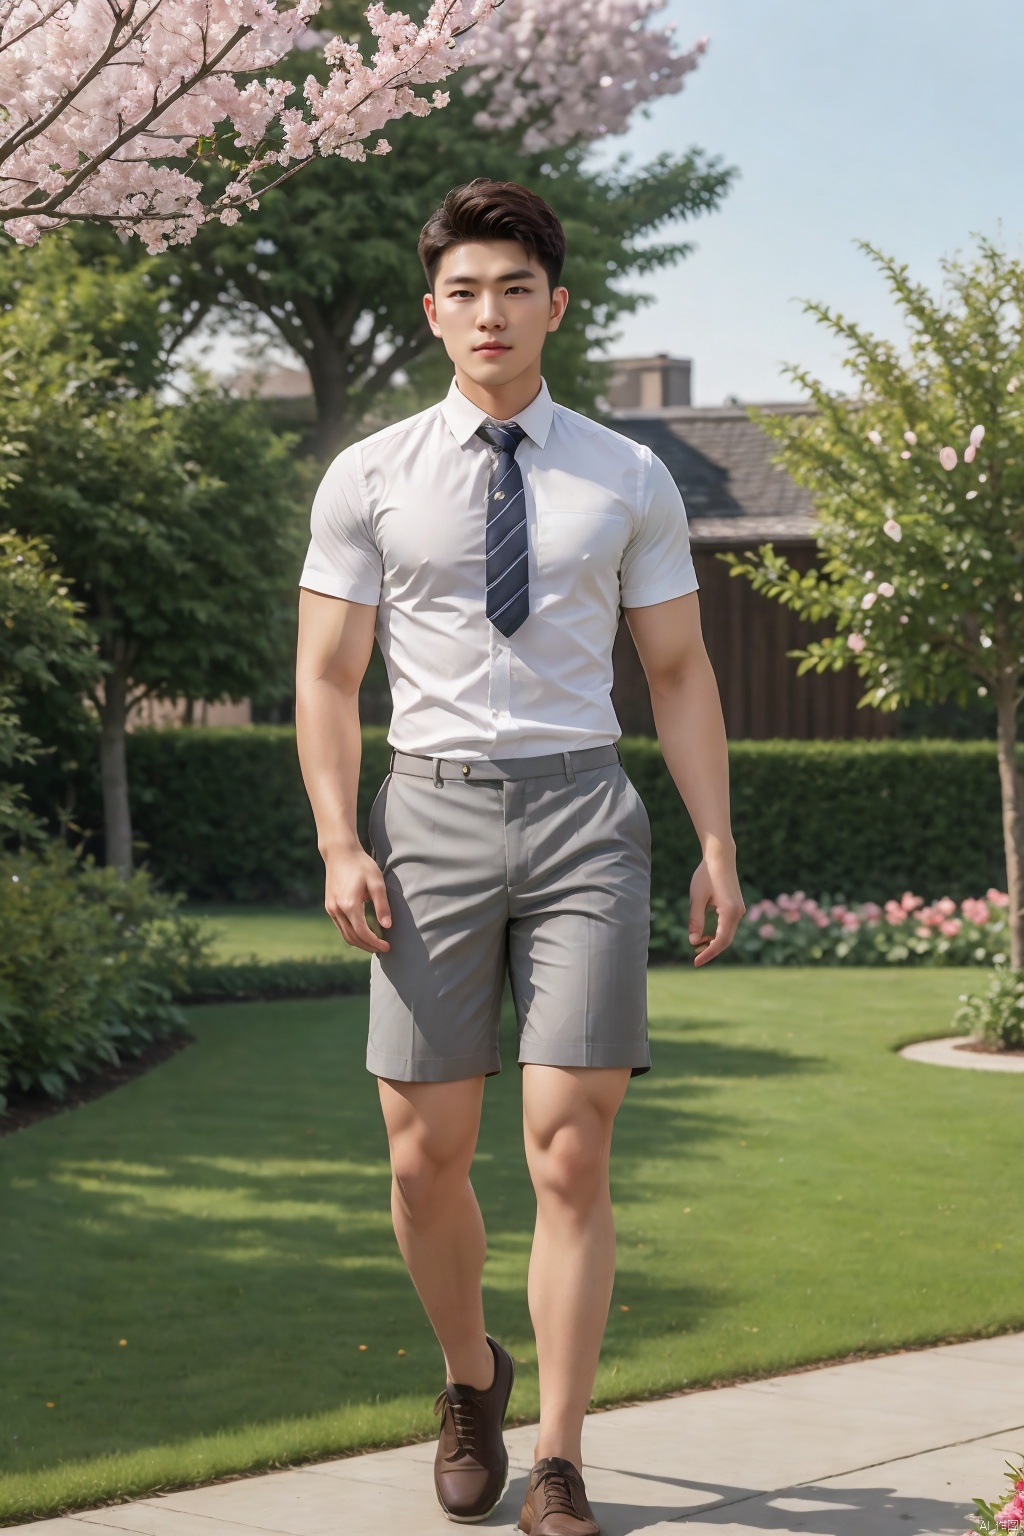  masterpiece,1 boy,Young,Handsome,Look at me,Short hair,Tea hair,Students,White shirt,Striped tie,Gray shorts,Stand,Outdoor,Garden,Peach tree,Flying petals,Light and shadow,HDR,textured skin,super detail,best quality, CodeMan001, SaSangAAA, LianmoNan, jzns,flm